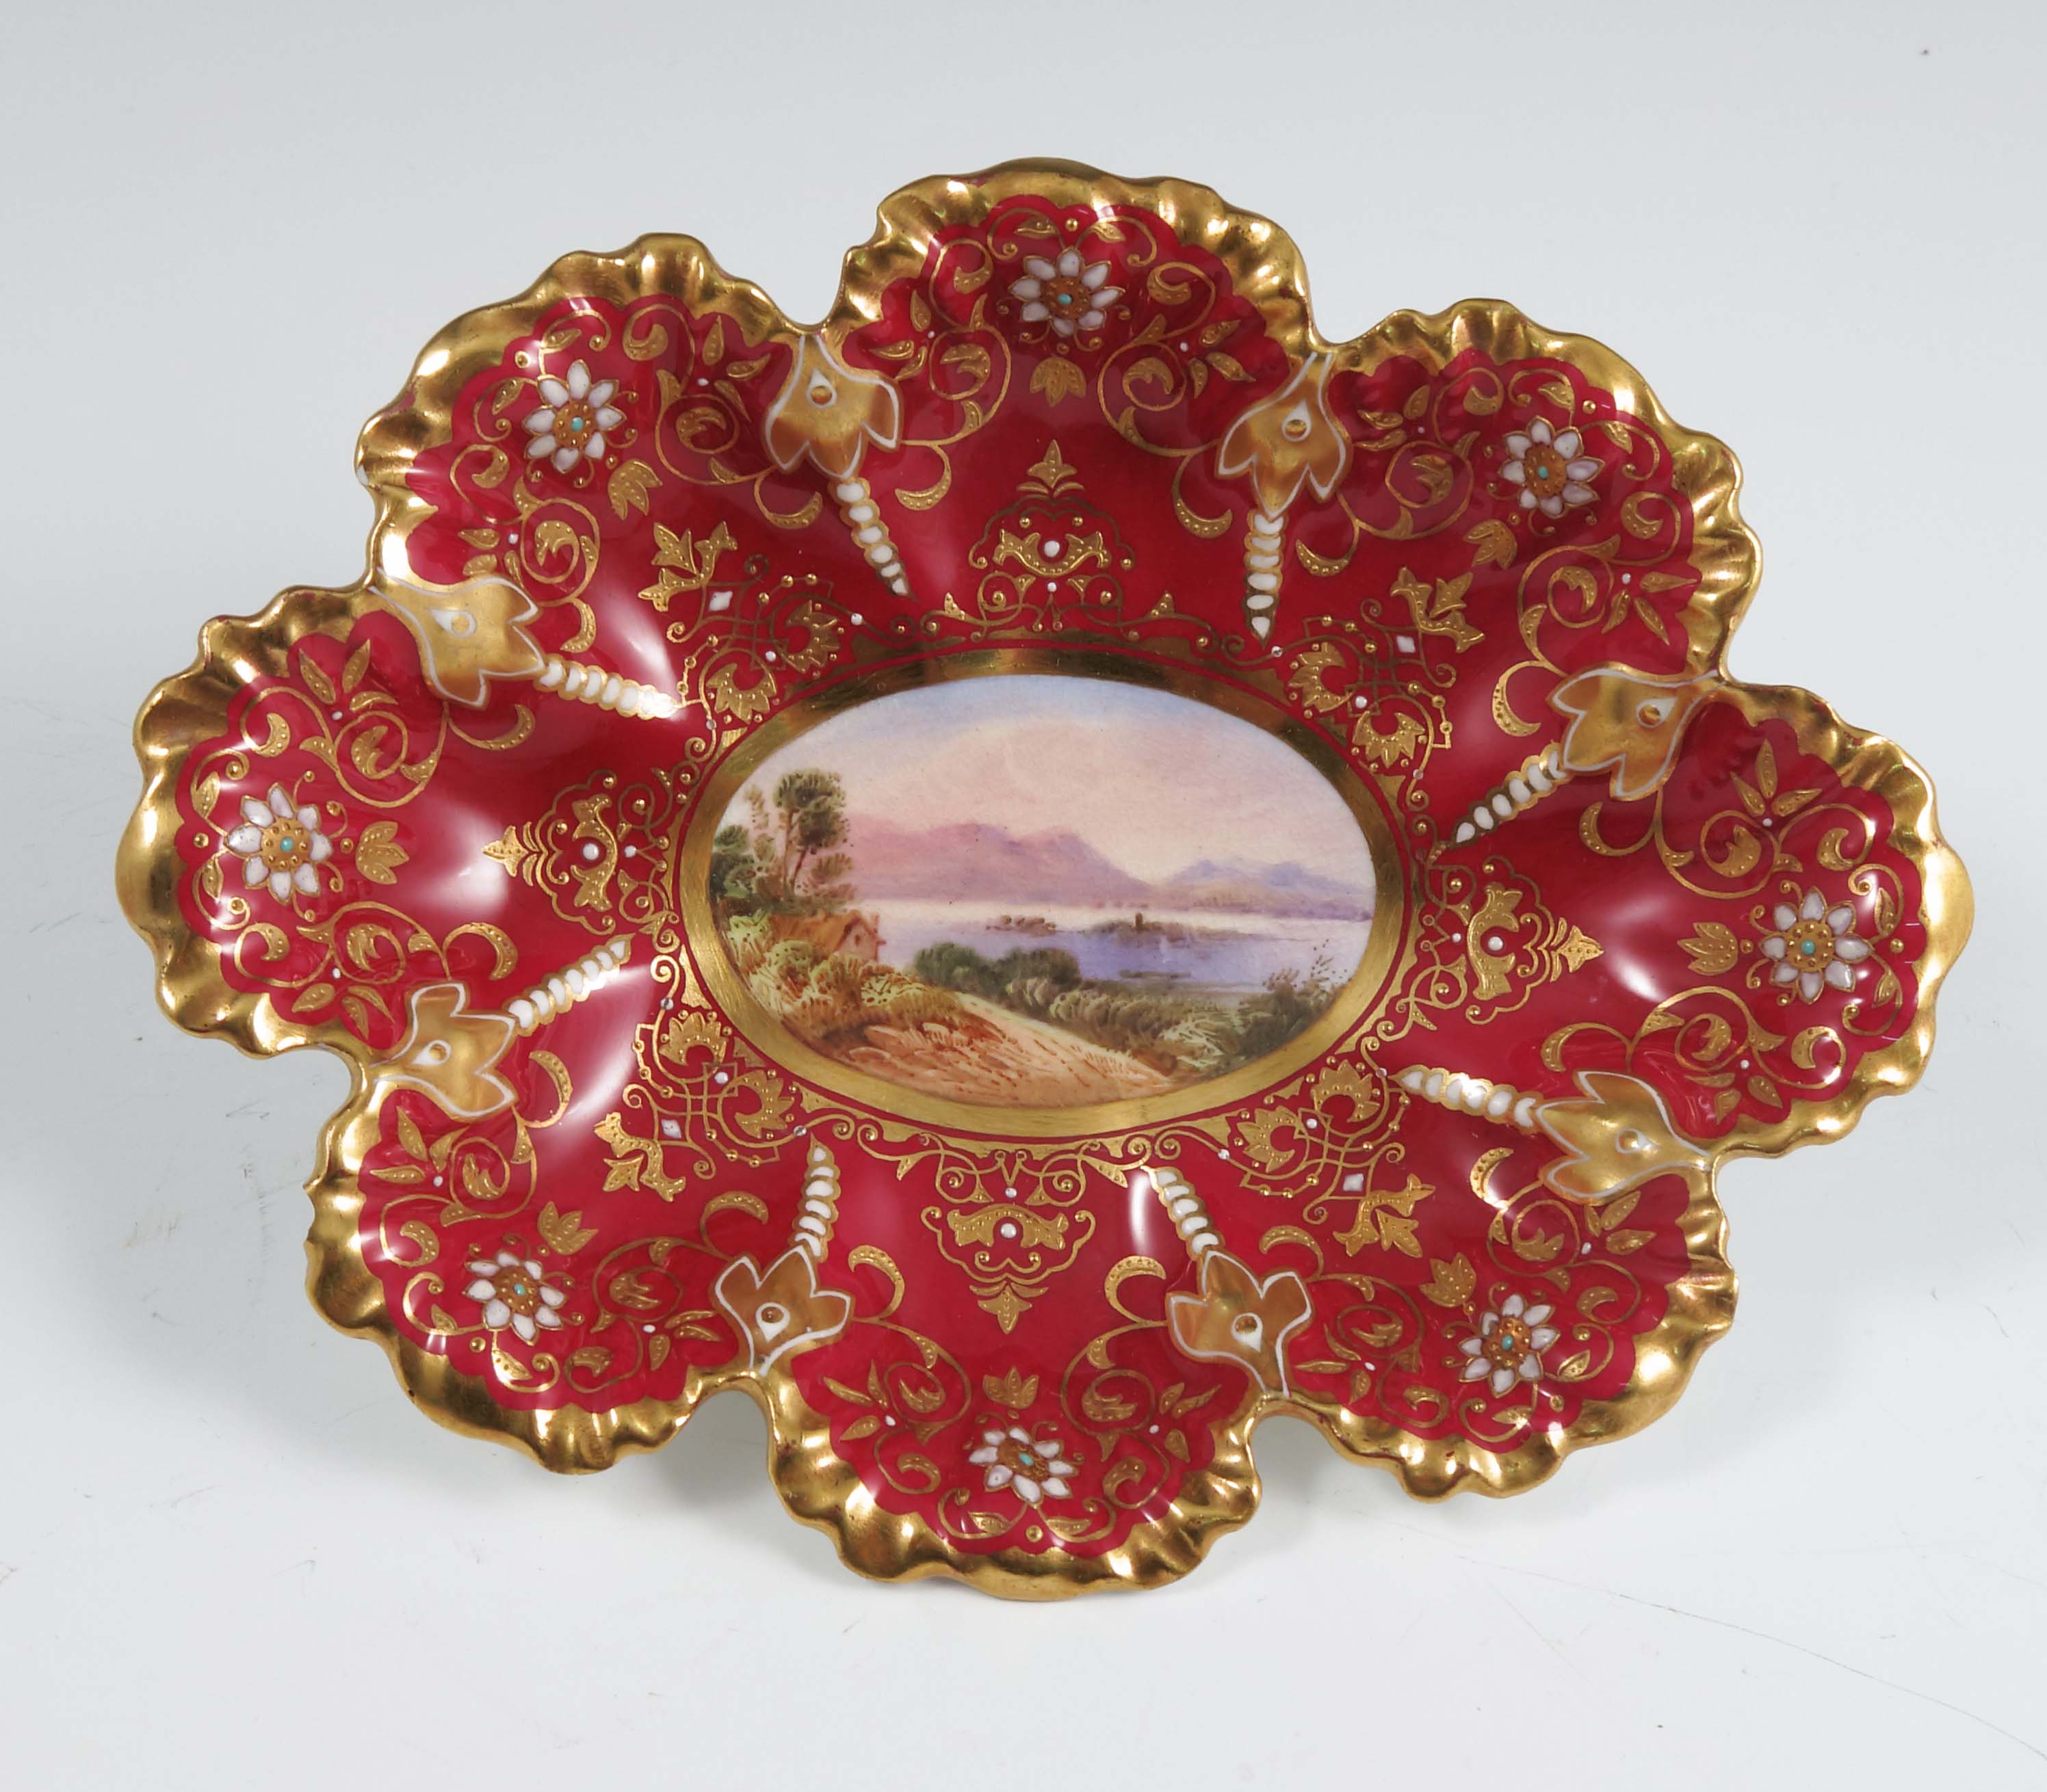 An oval Coalport dish, decorated with a central panel of a lake scene with buildings and